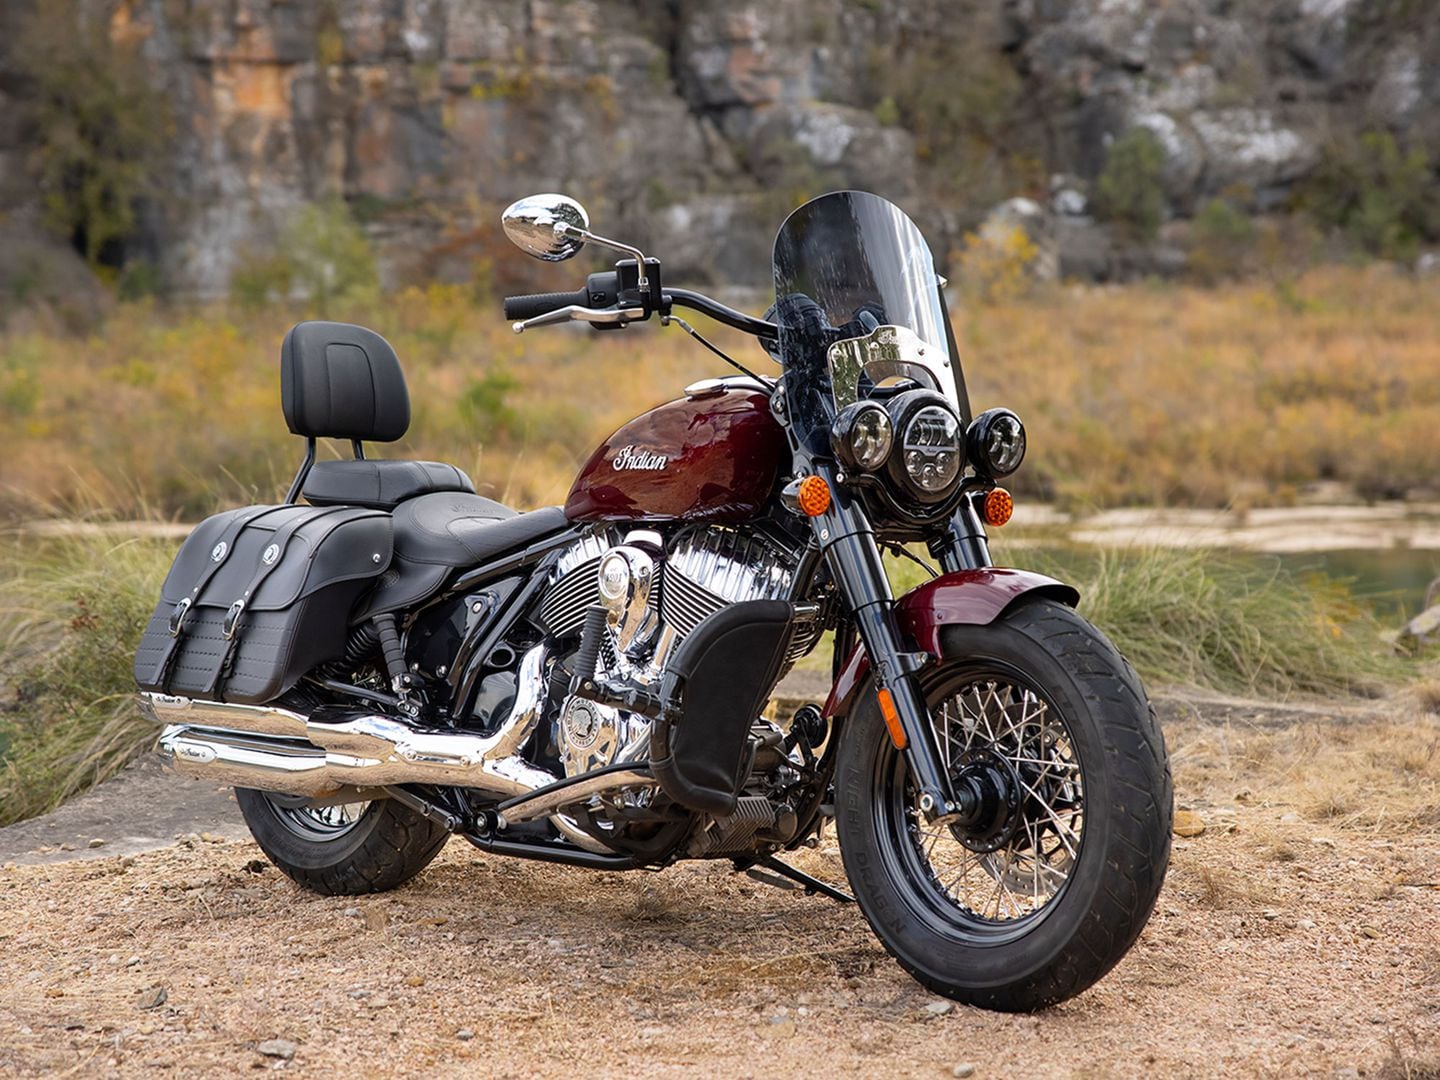 2022 Indian Chief Buyer's Guide: Specs, Photos, Price